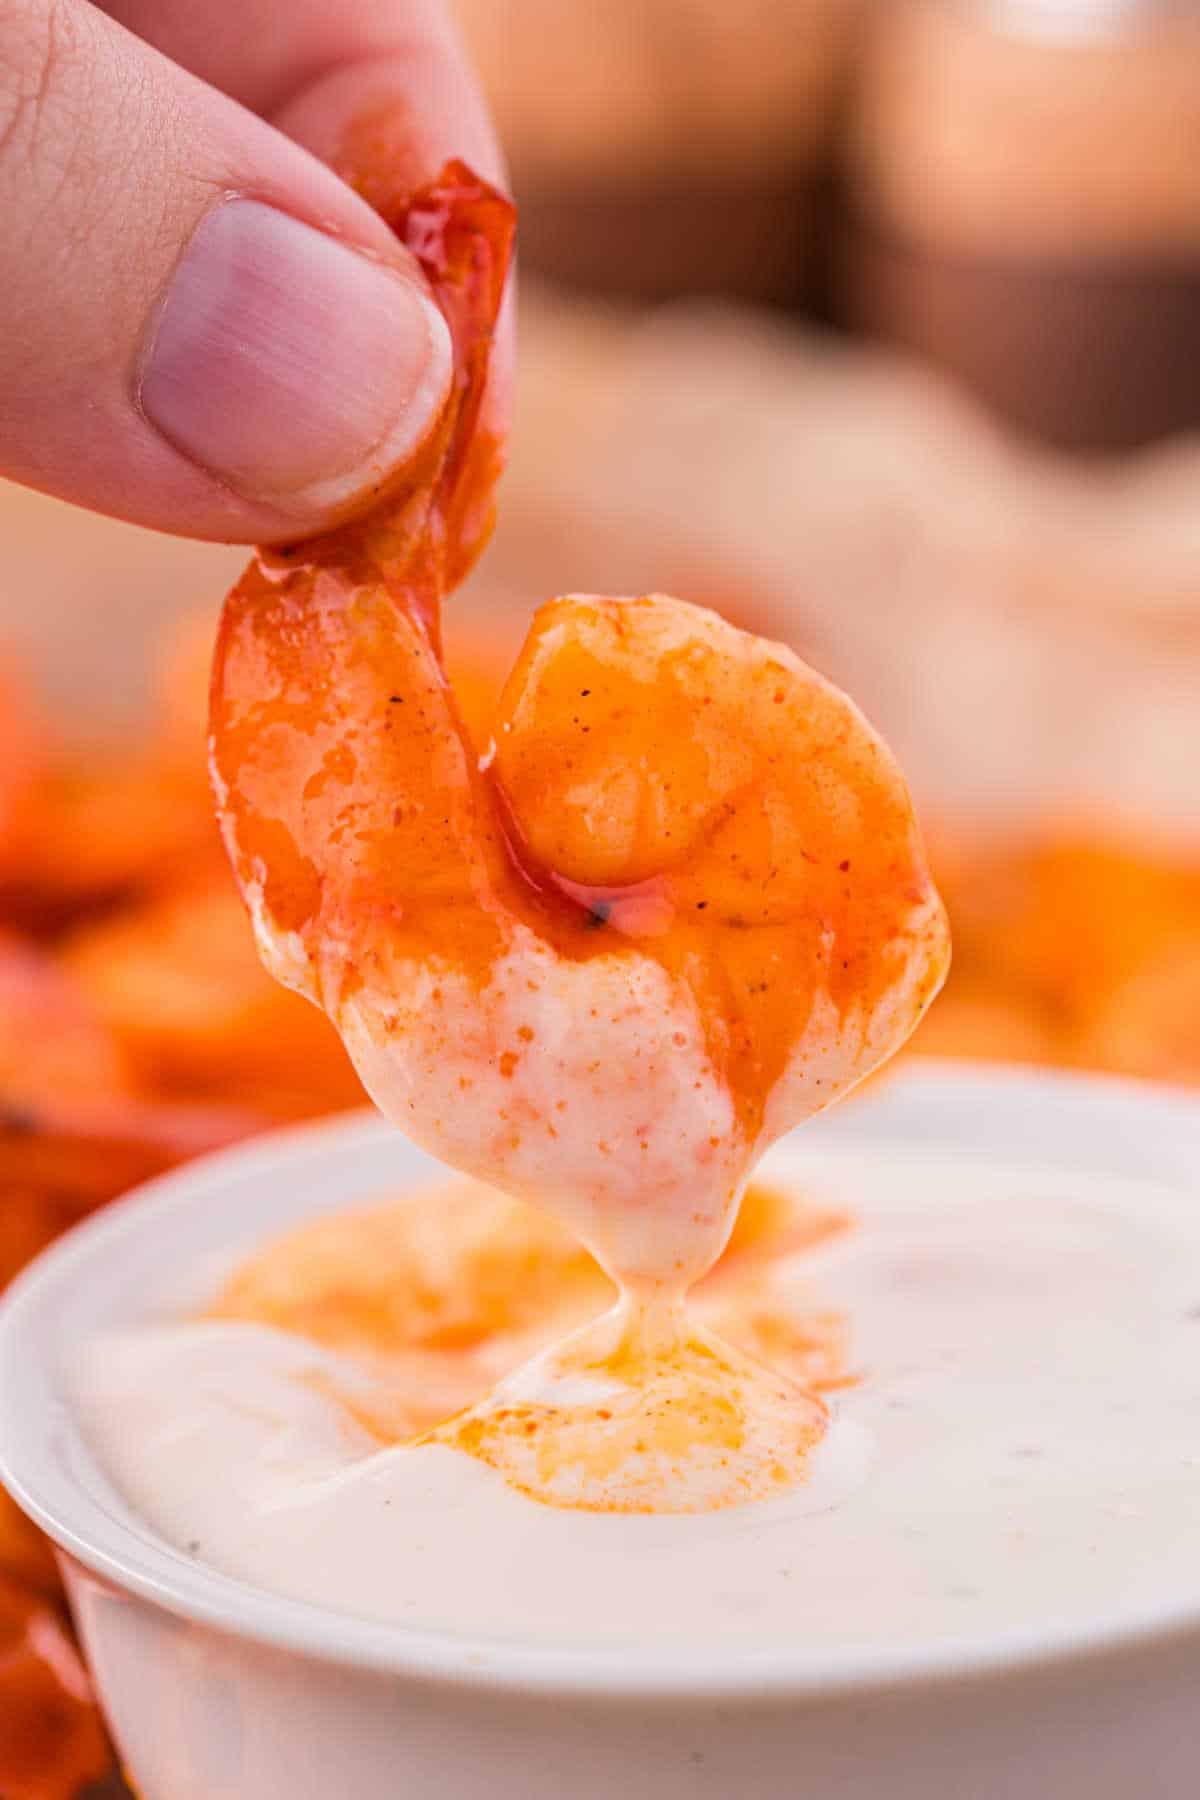 A hand holding a buffalo shrimp dipping in ranch dipping sauce.